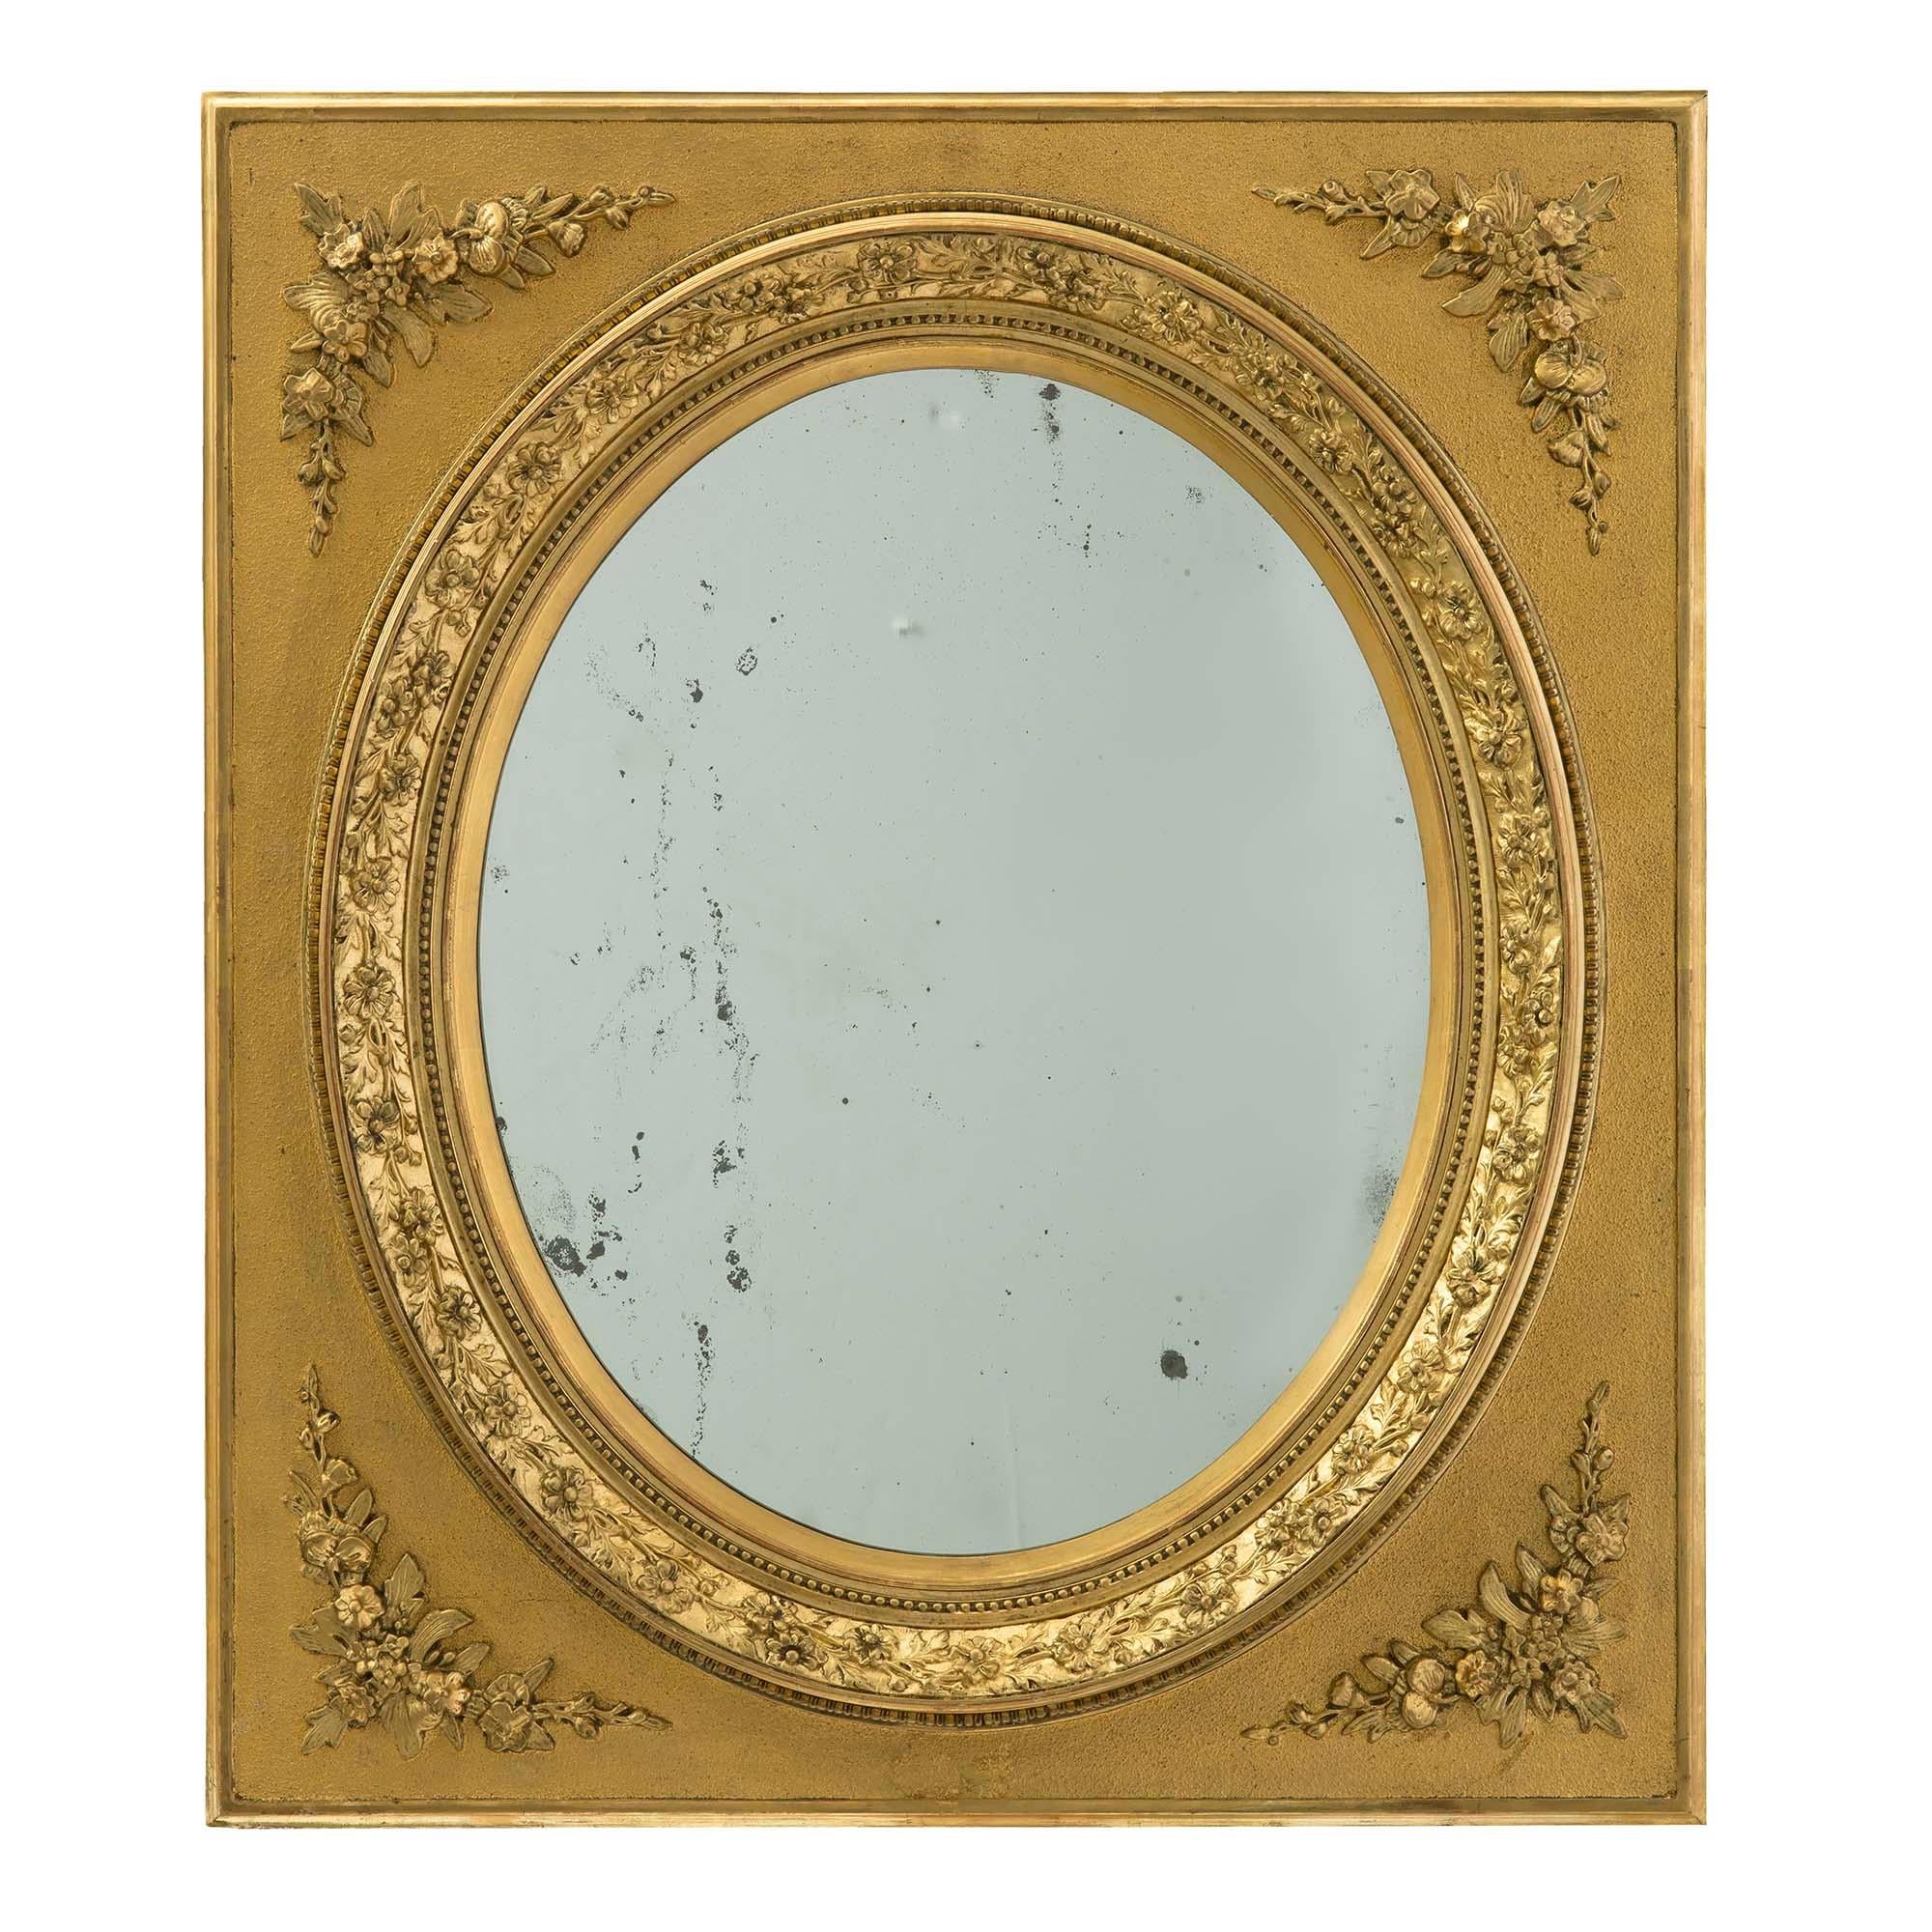 A pair of French 19th century Louis XVI St. gilt wood mirrors. Each mirror is within a square frame and oval cutout with foliate trim in a satin and burnished finish. At each corner are foliate garlands. These mirrors may be displayed vertically or